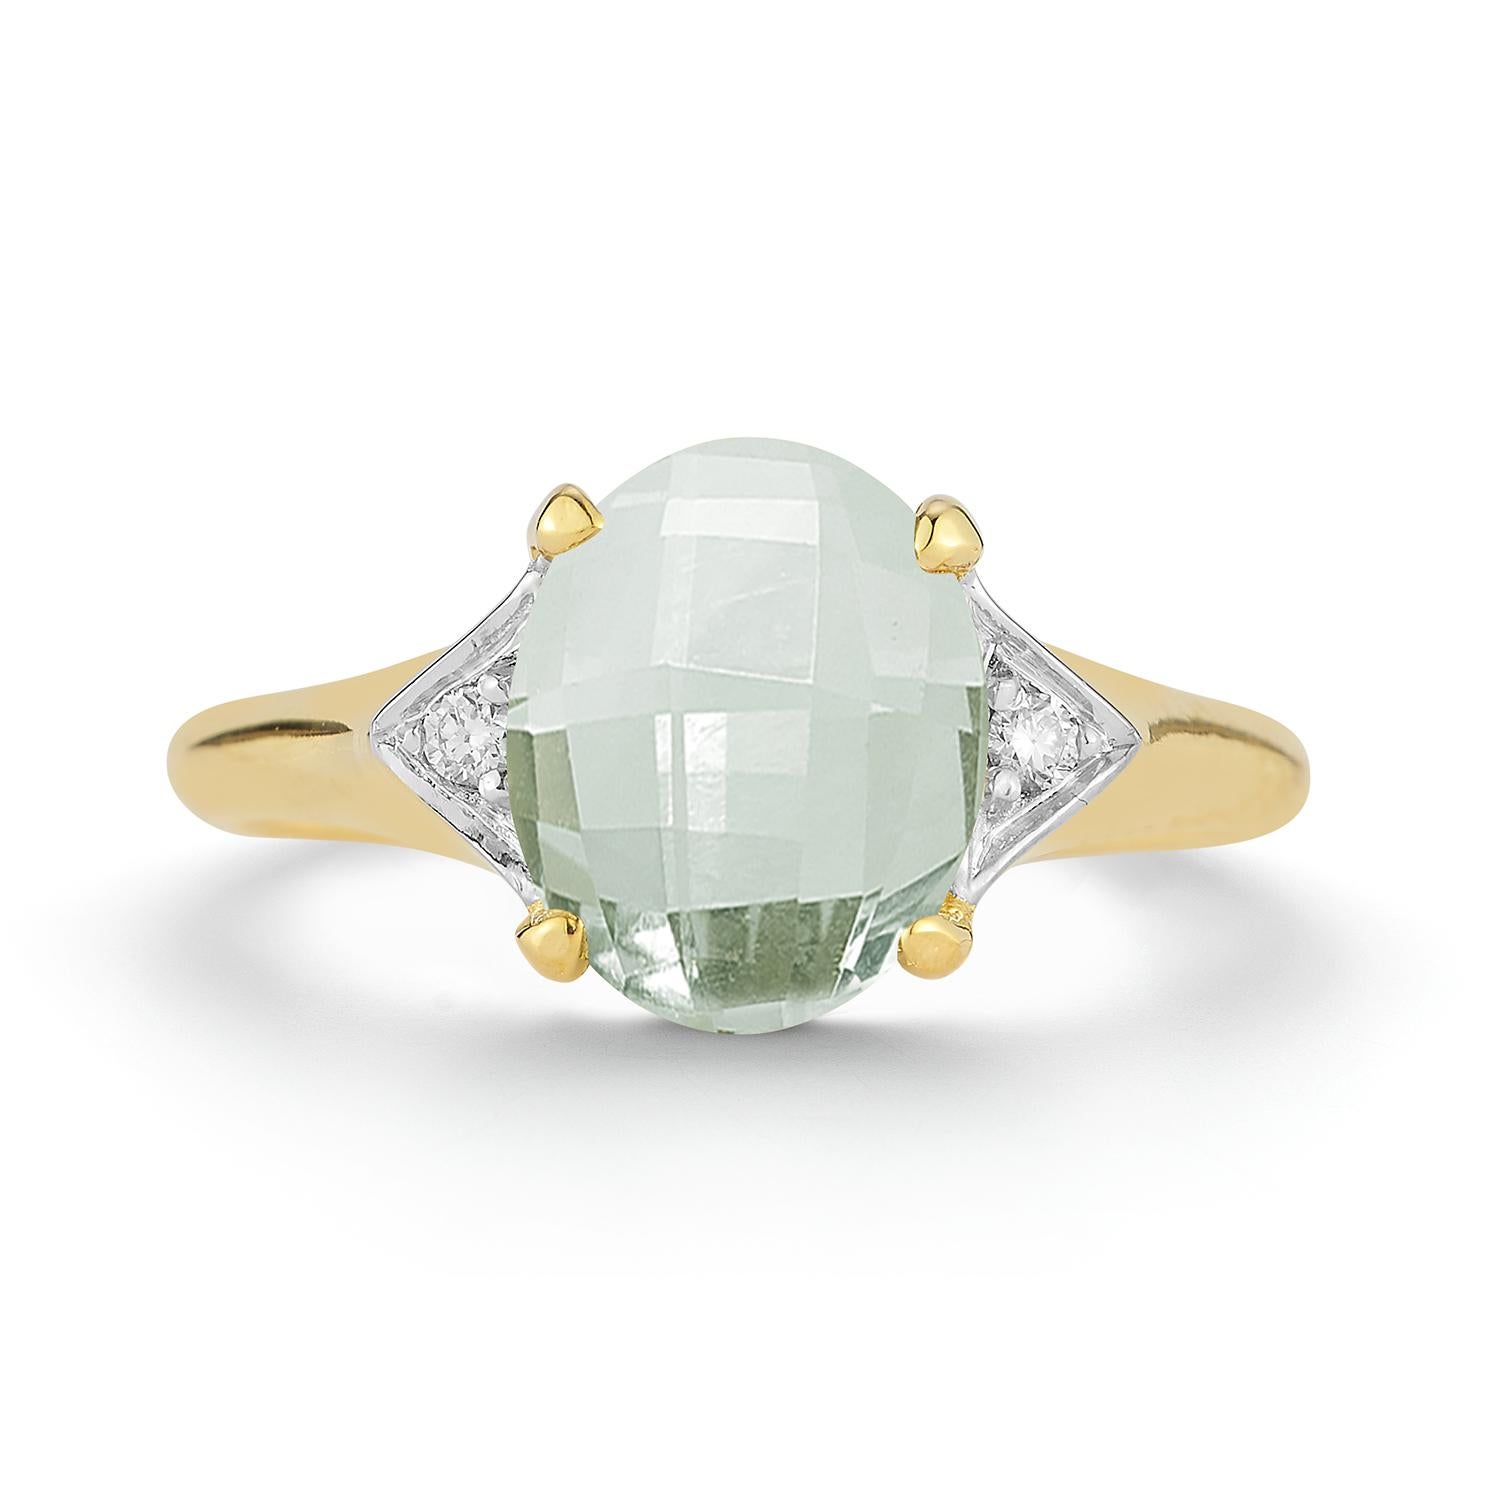 For Sale:  Hand-Crafted 14K Gold 0.05 ct. tw. Diamond & 5.25CT Green Amethyst Cocktail Ring 2